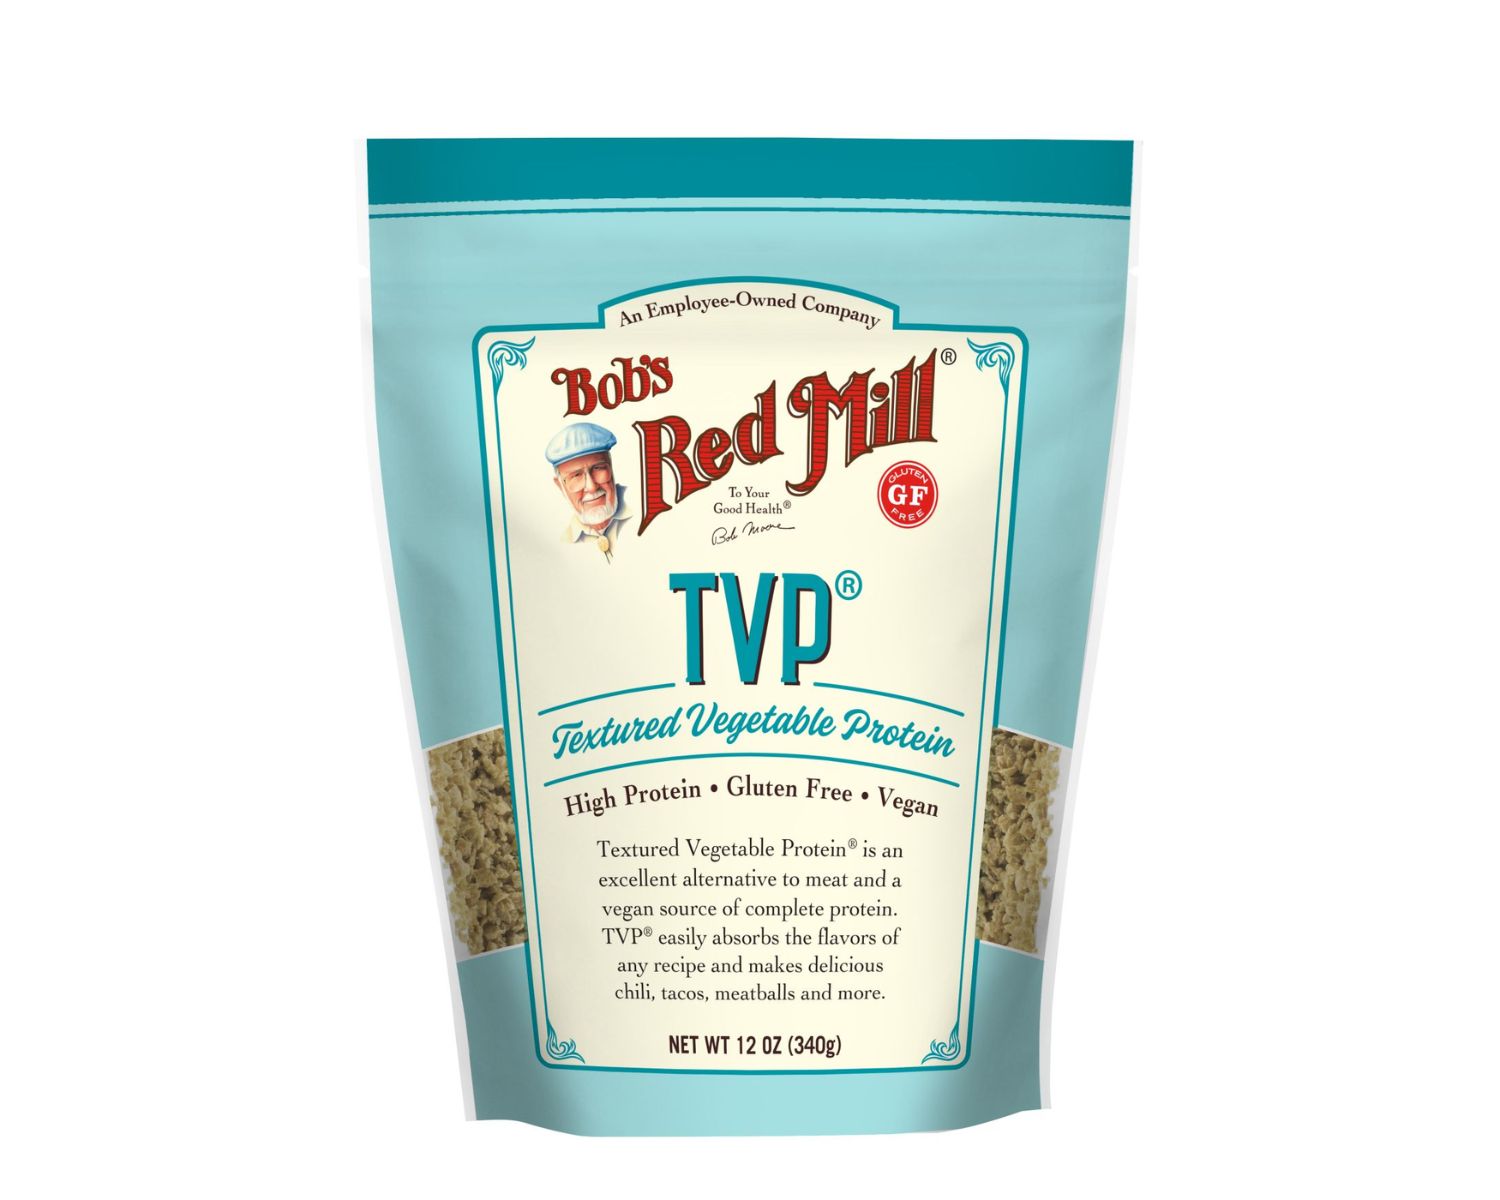 19-bobs-red-mill-tvp-nutrition-facts